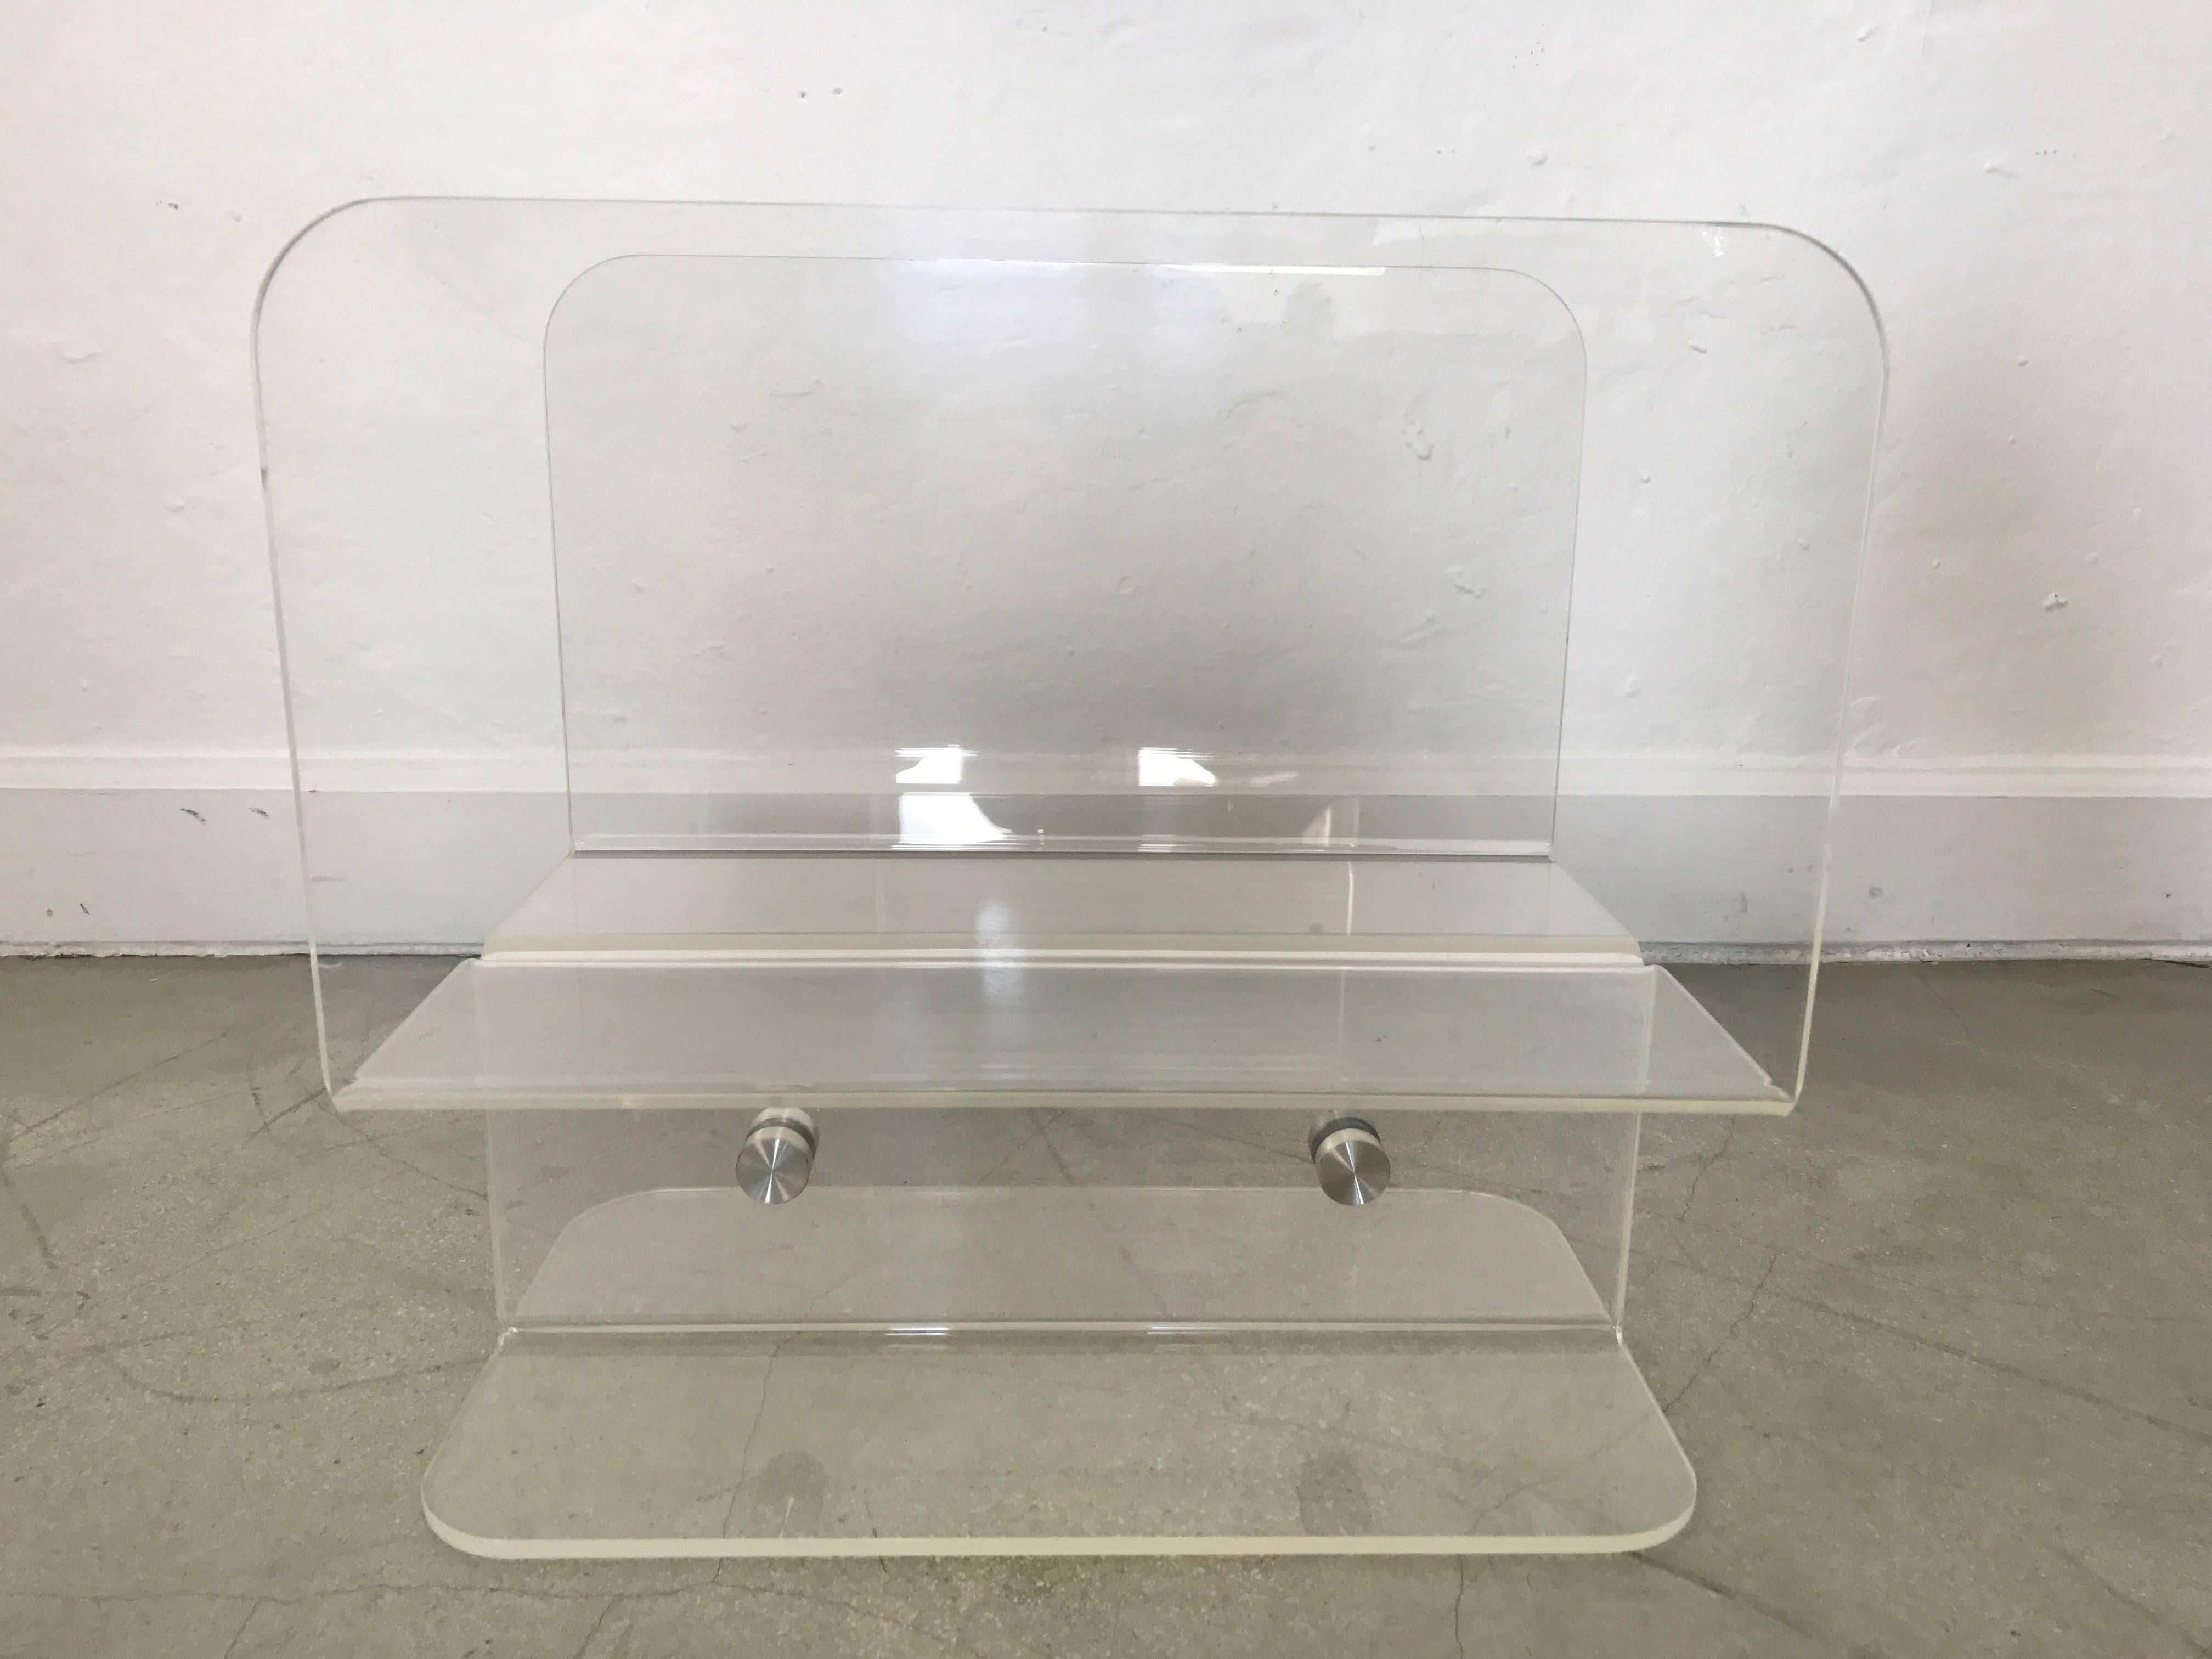 Molded Lucite and aluminum magazine or book rack by Charles Hollis Jones.